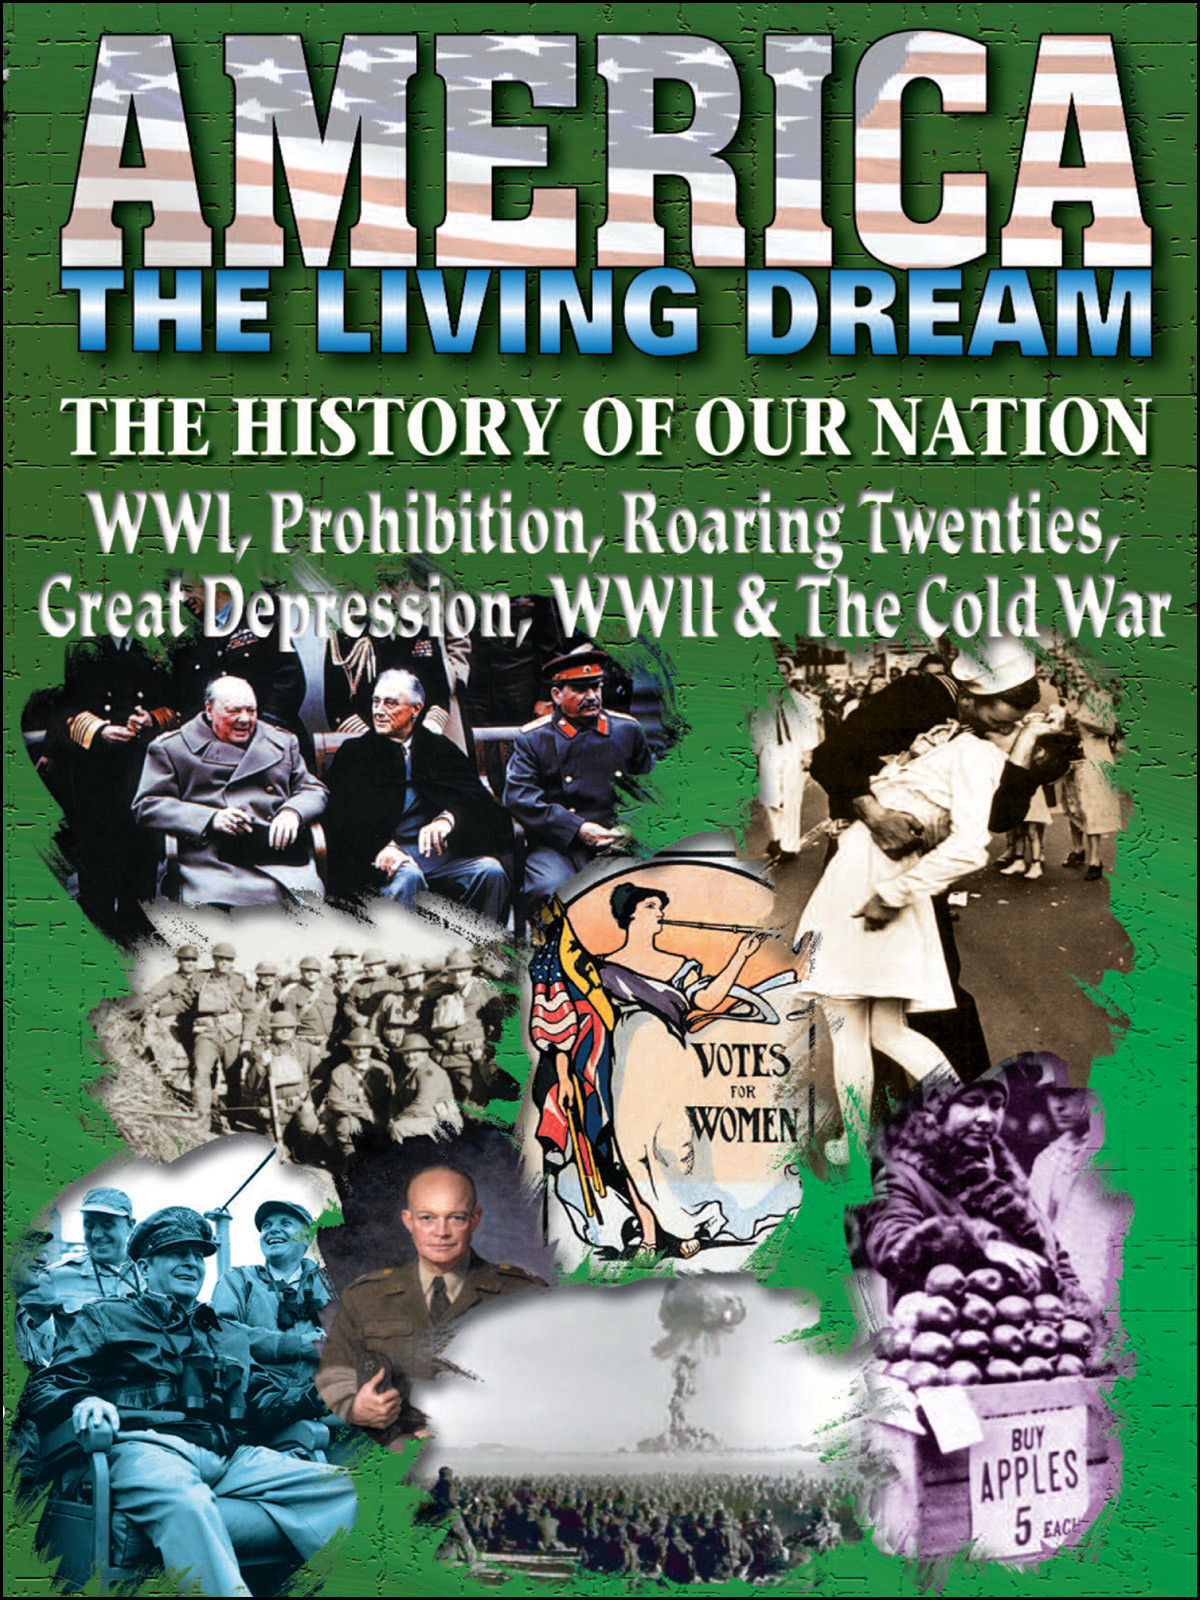 L2534 - WWI, Prohibition, Roaring Twenties, Great Depression, WWII & The Cold War